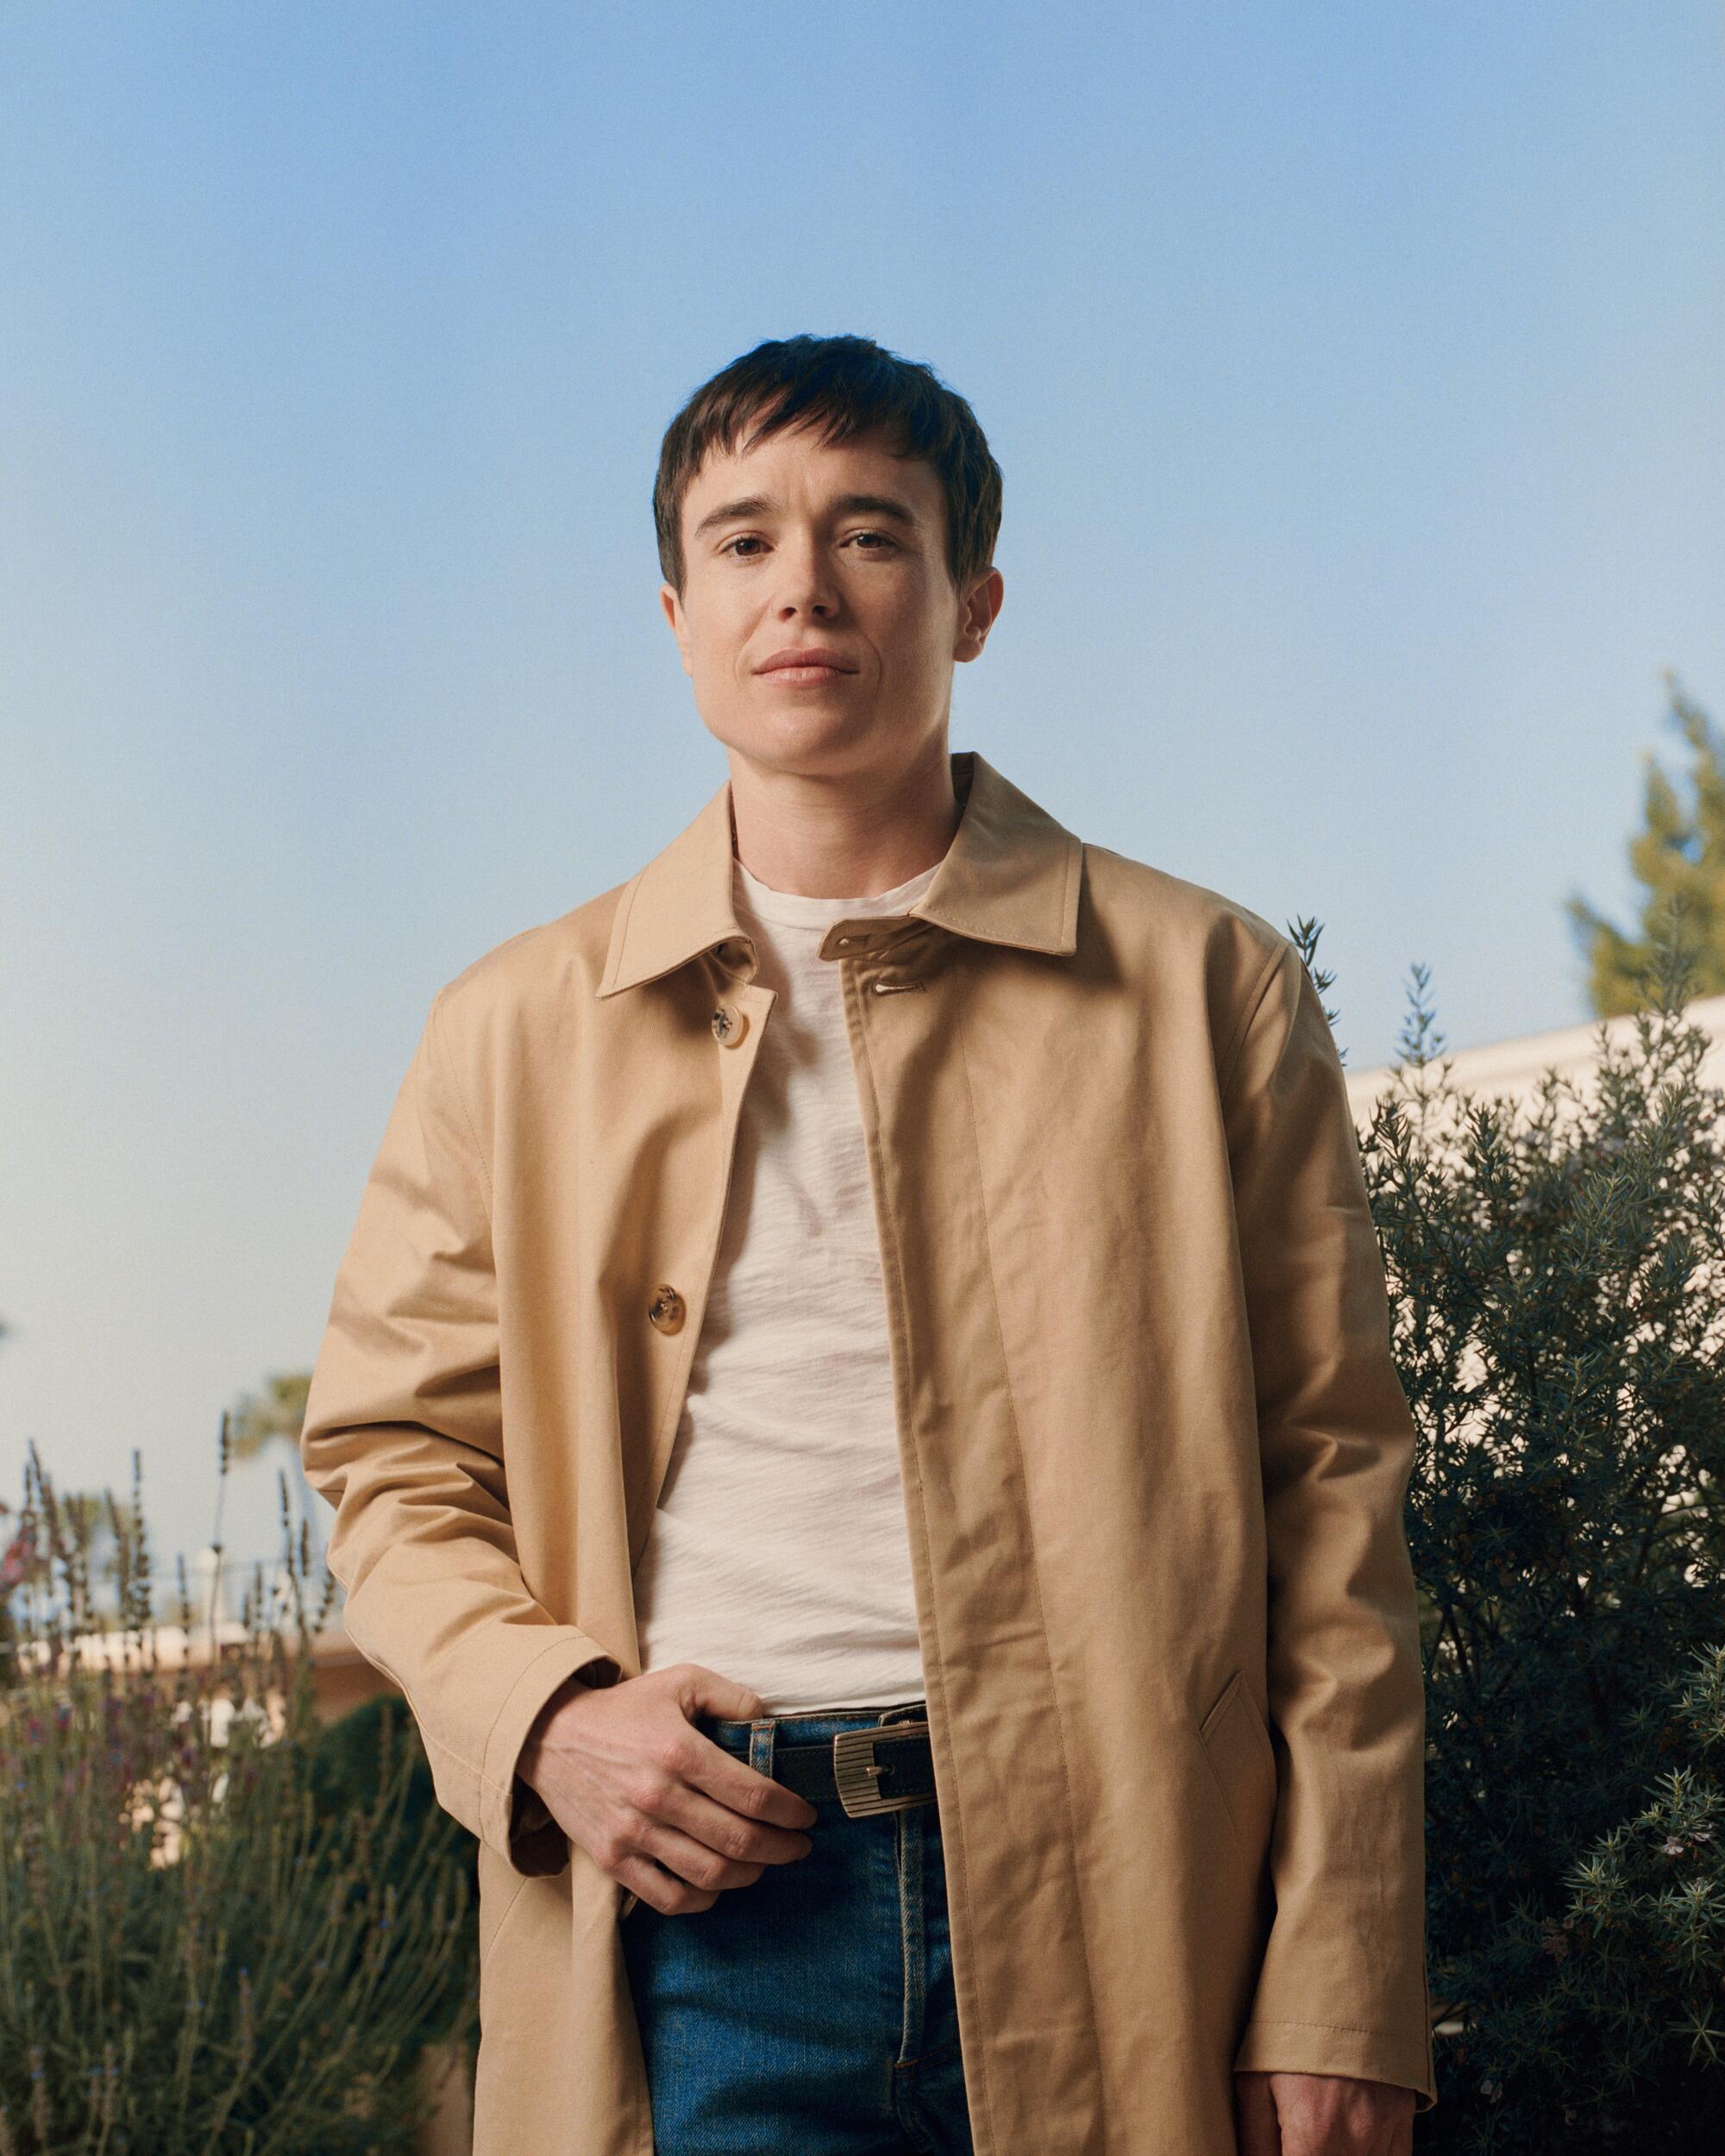 Elliot Page, wearing a tan coat, stands outdoors against a blue sky